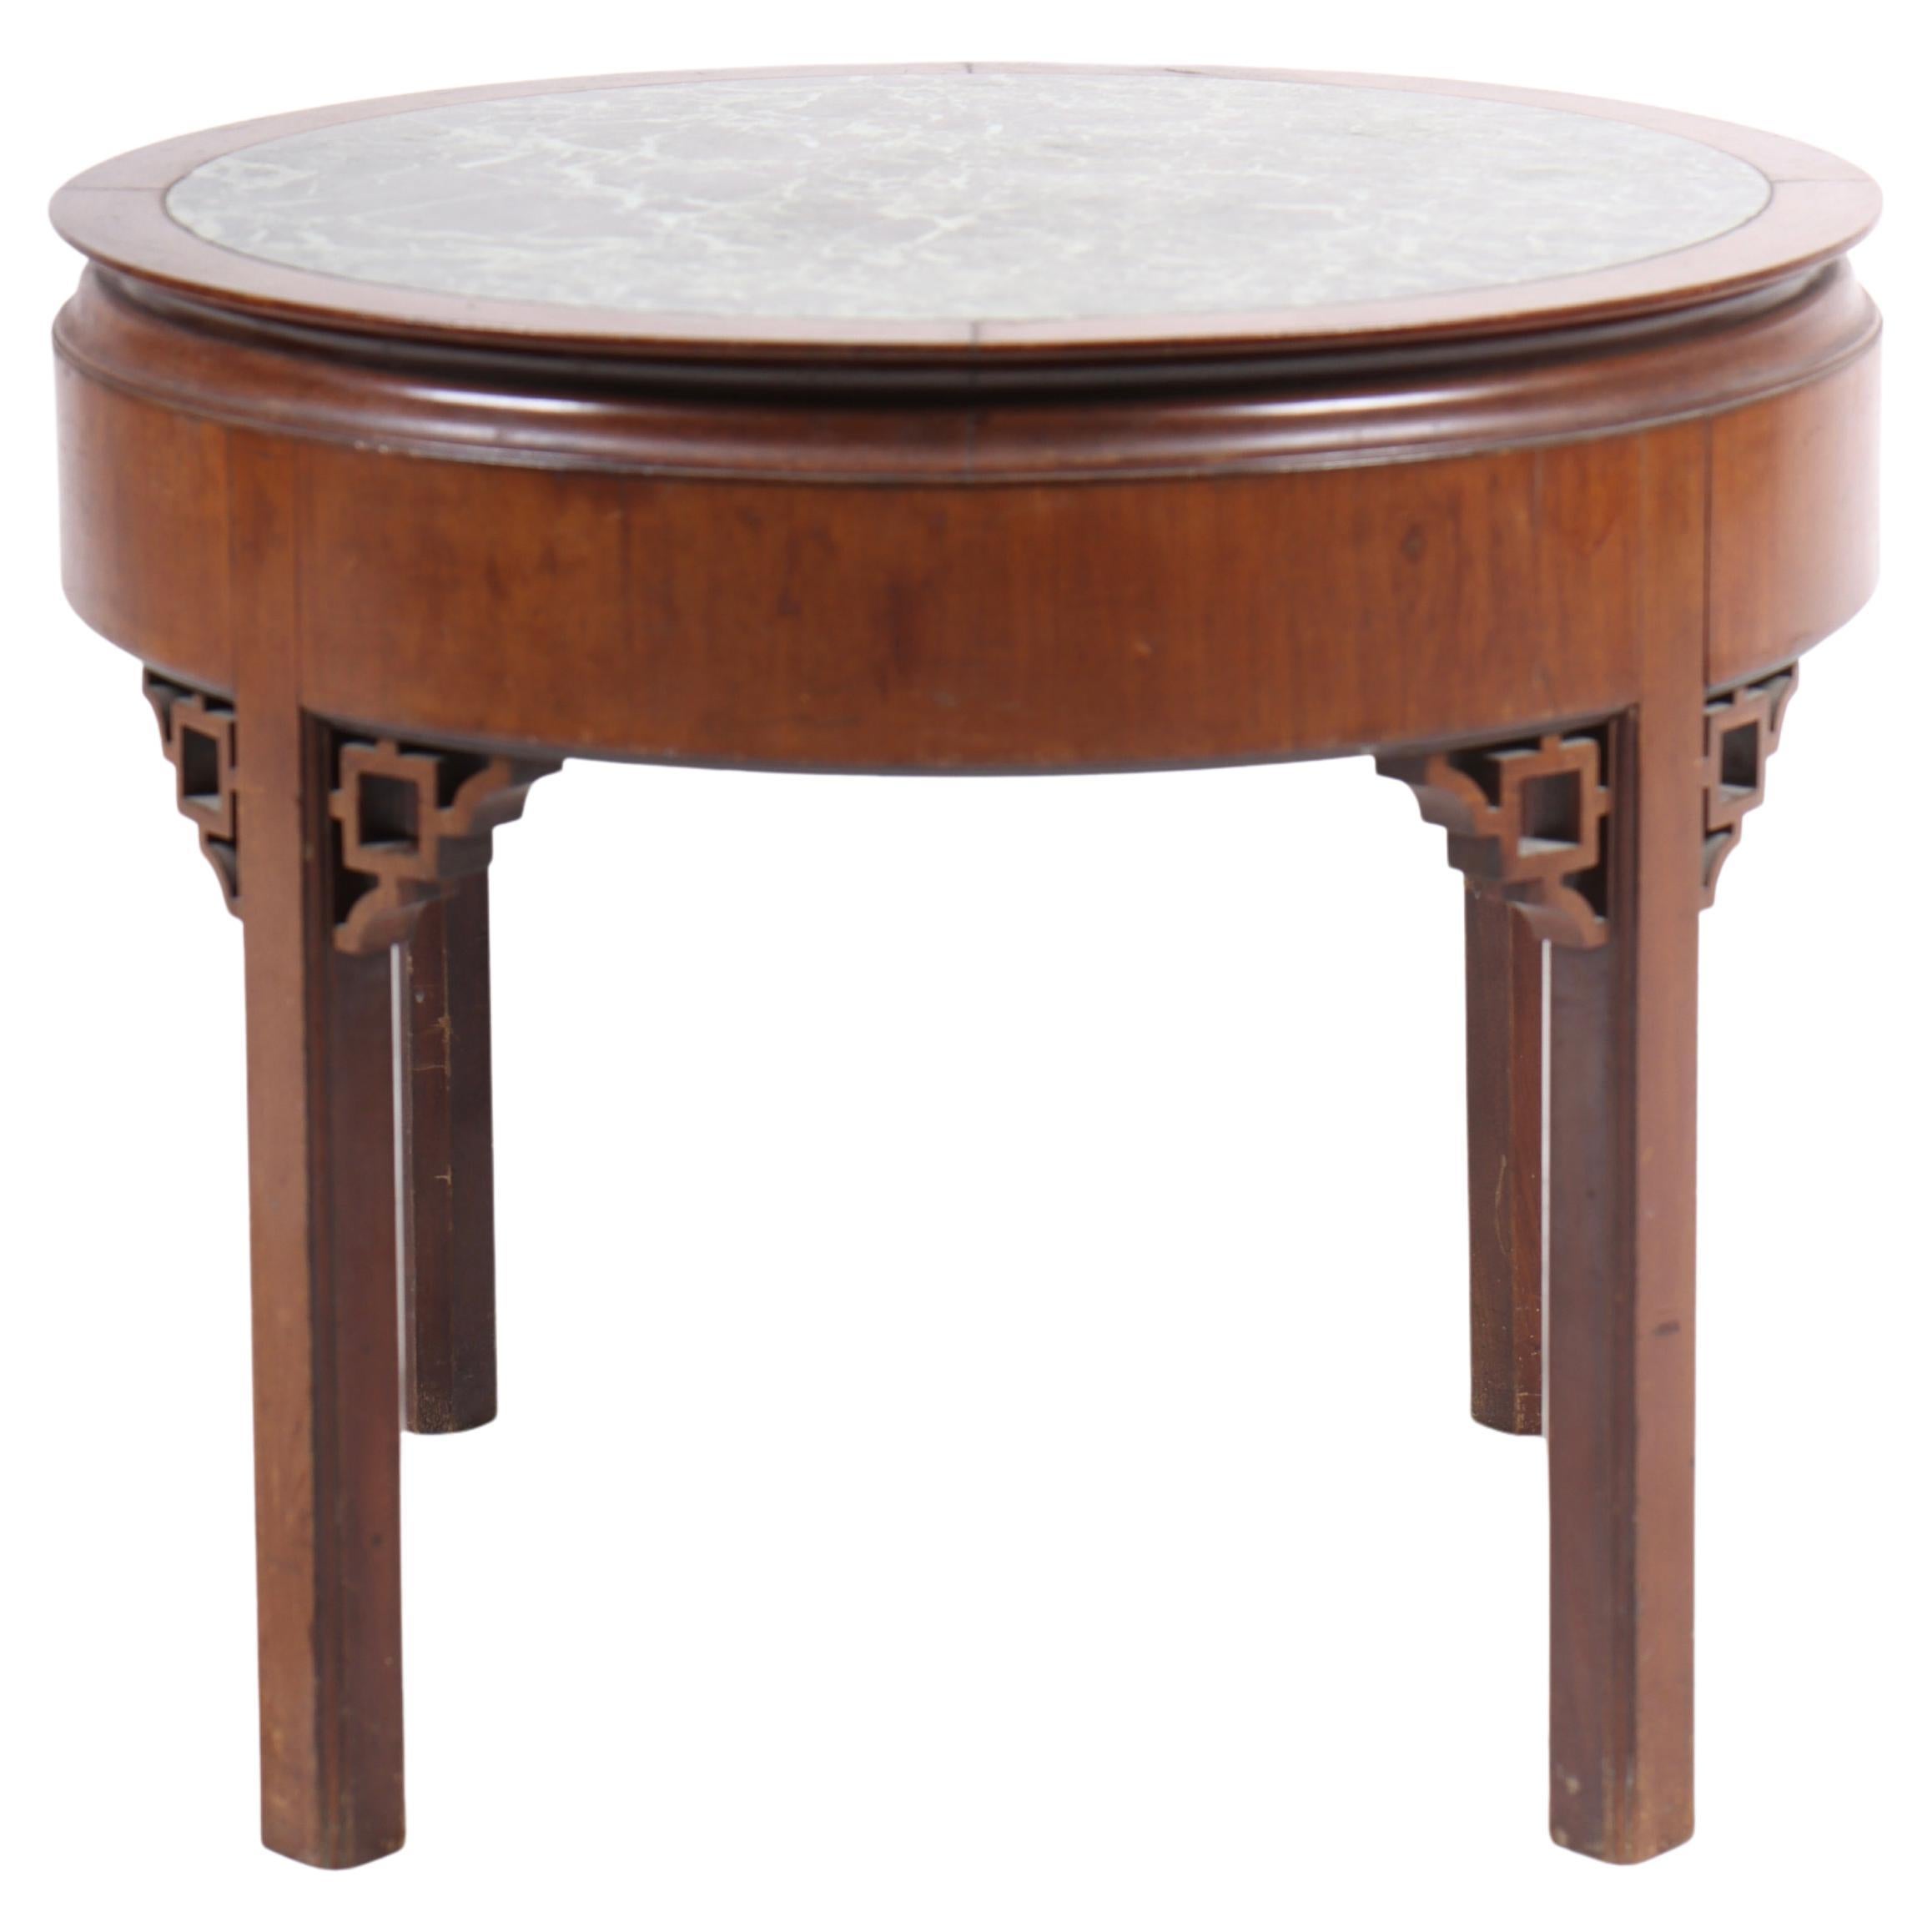 Low Table in Mahogany and Marble, Made in Denmark 1930s For Sale